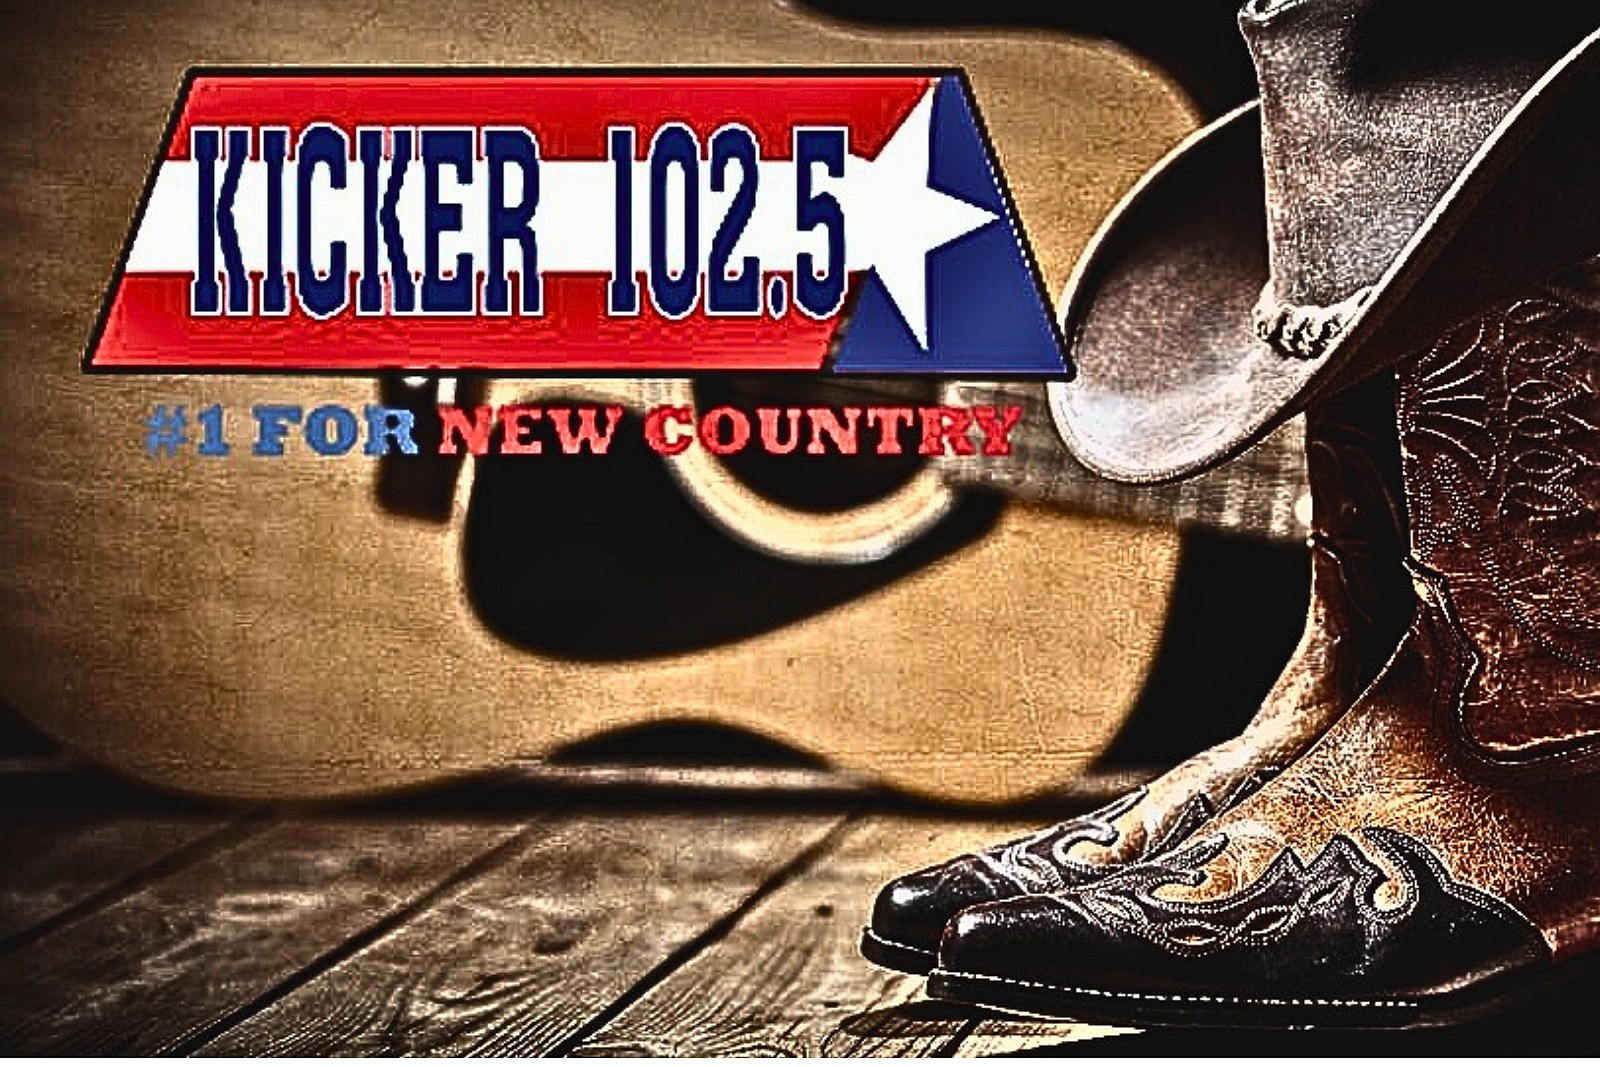 Here's How to Help Kicker Be Arkansas Radio Station of The Year